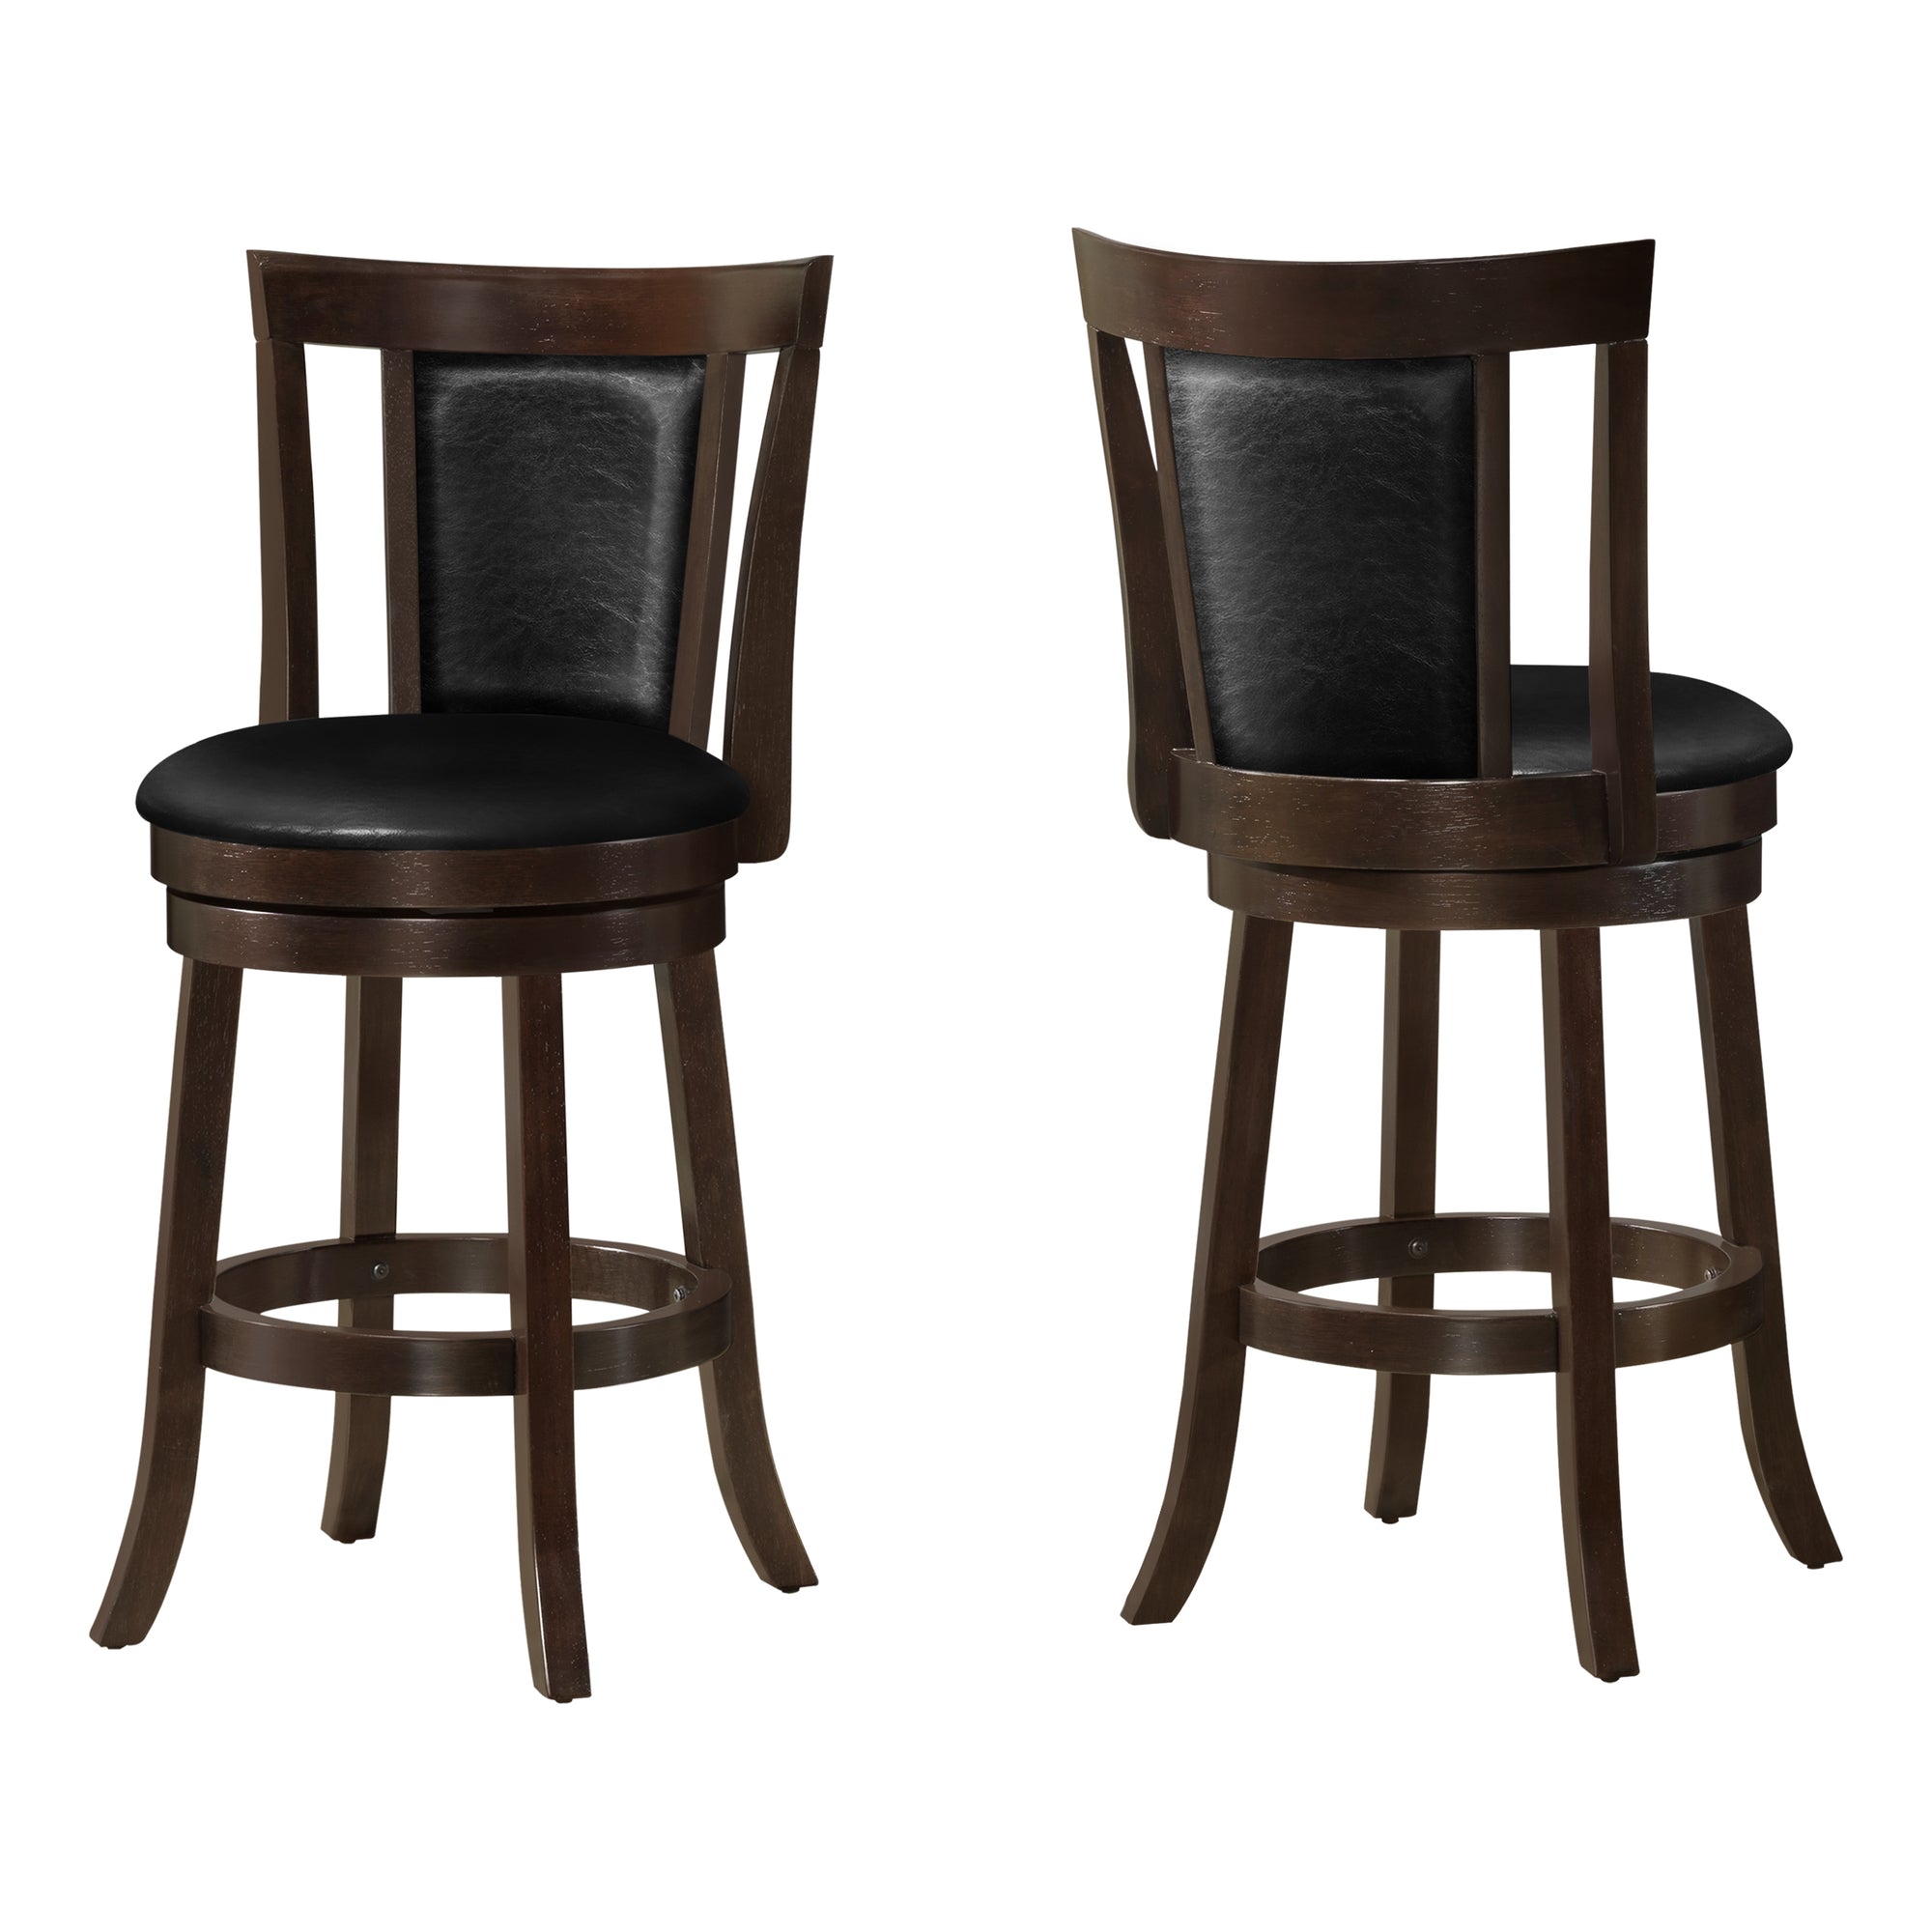 MN-221288    Bar Stool, Set Of 2, Swivel, Counter Height, Wood, Leather Look, Dark Brown, Black, Transitional